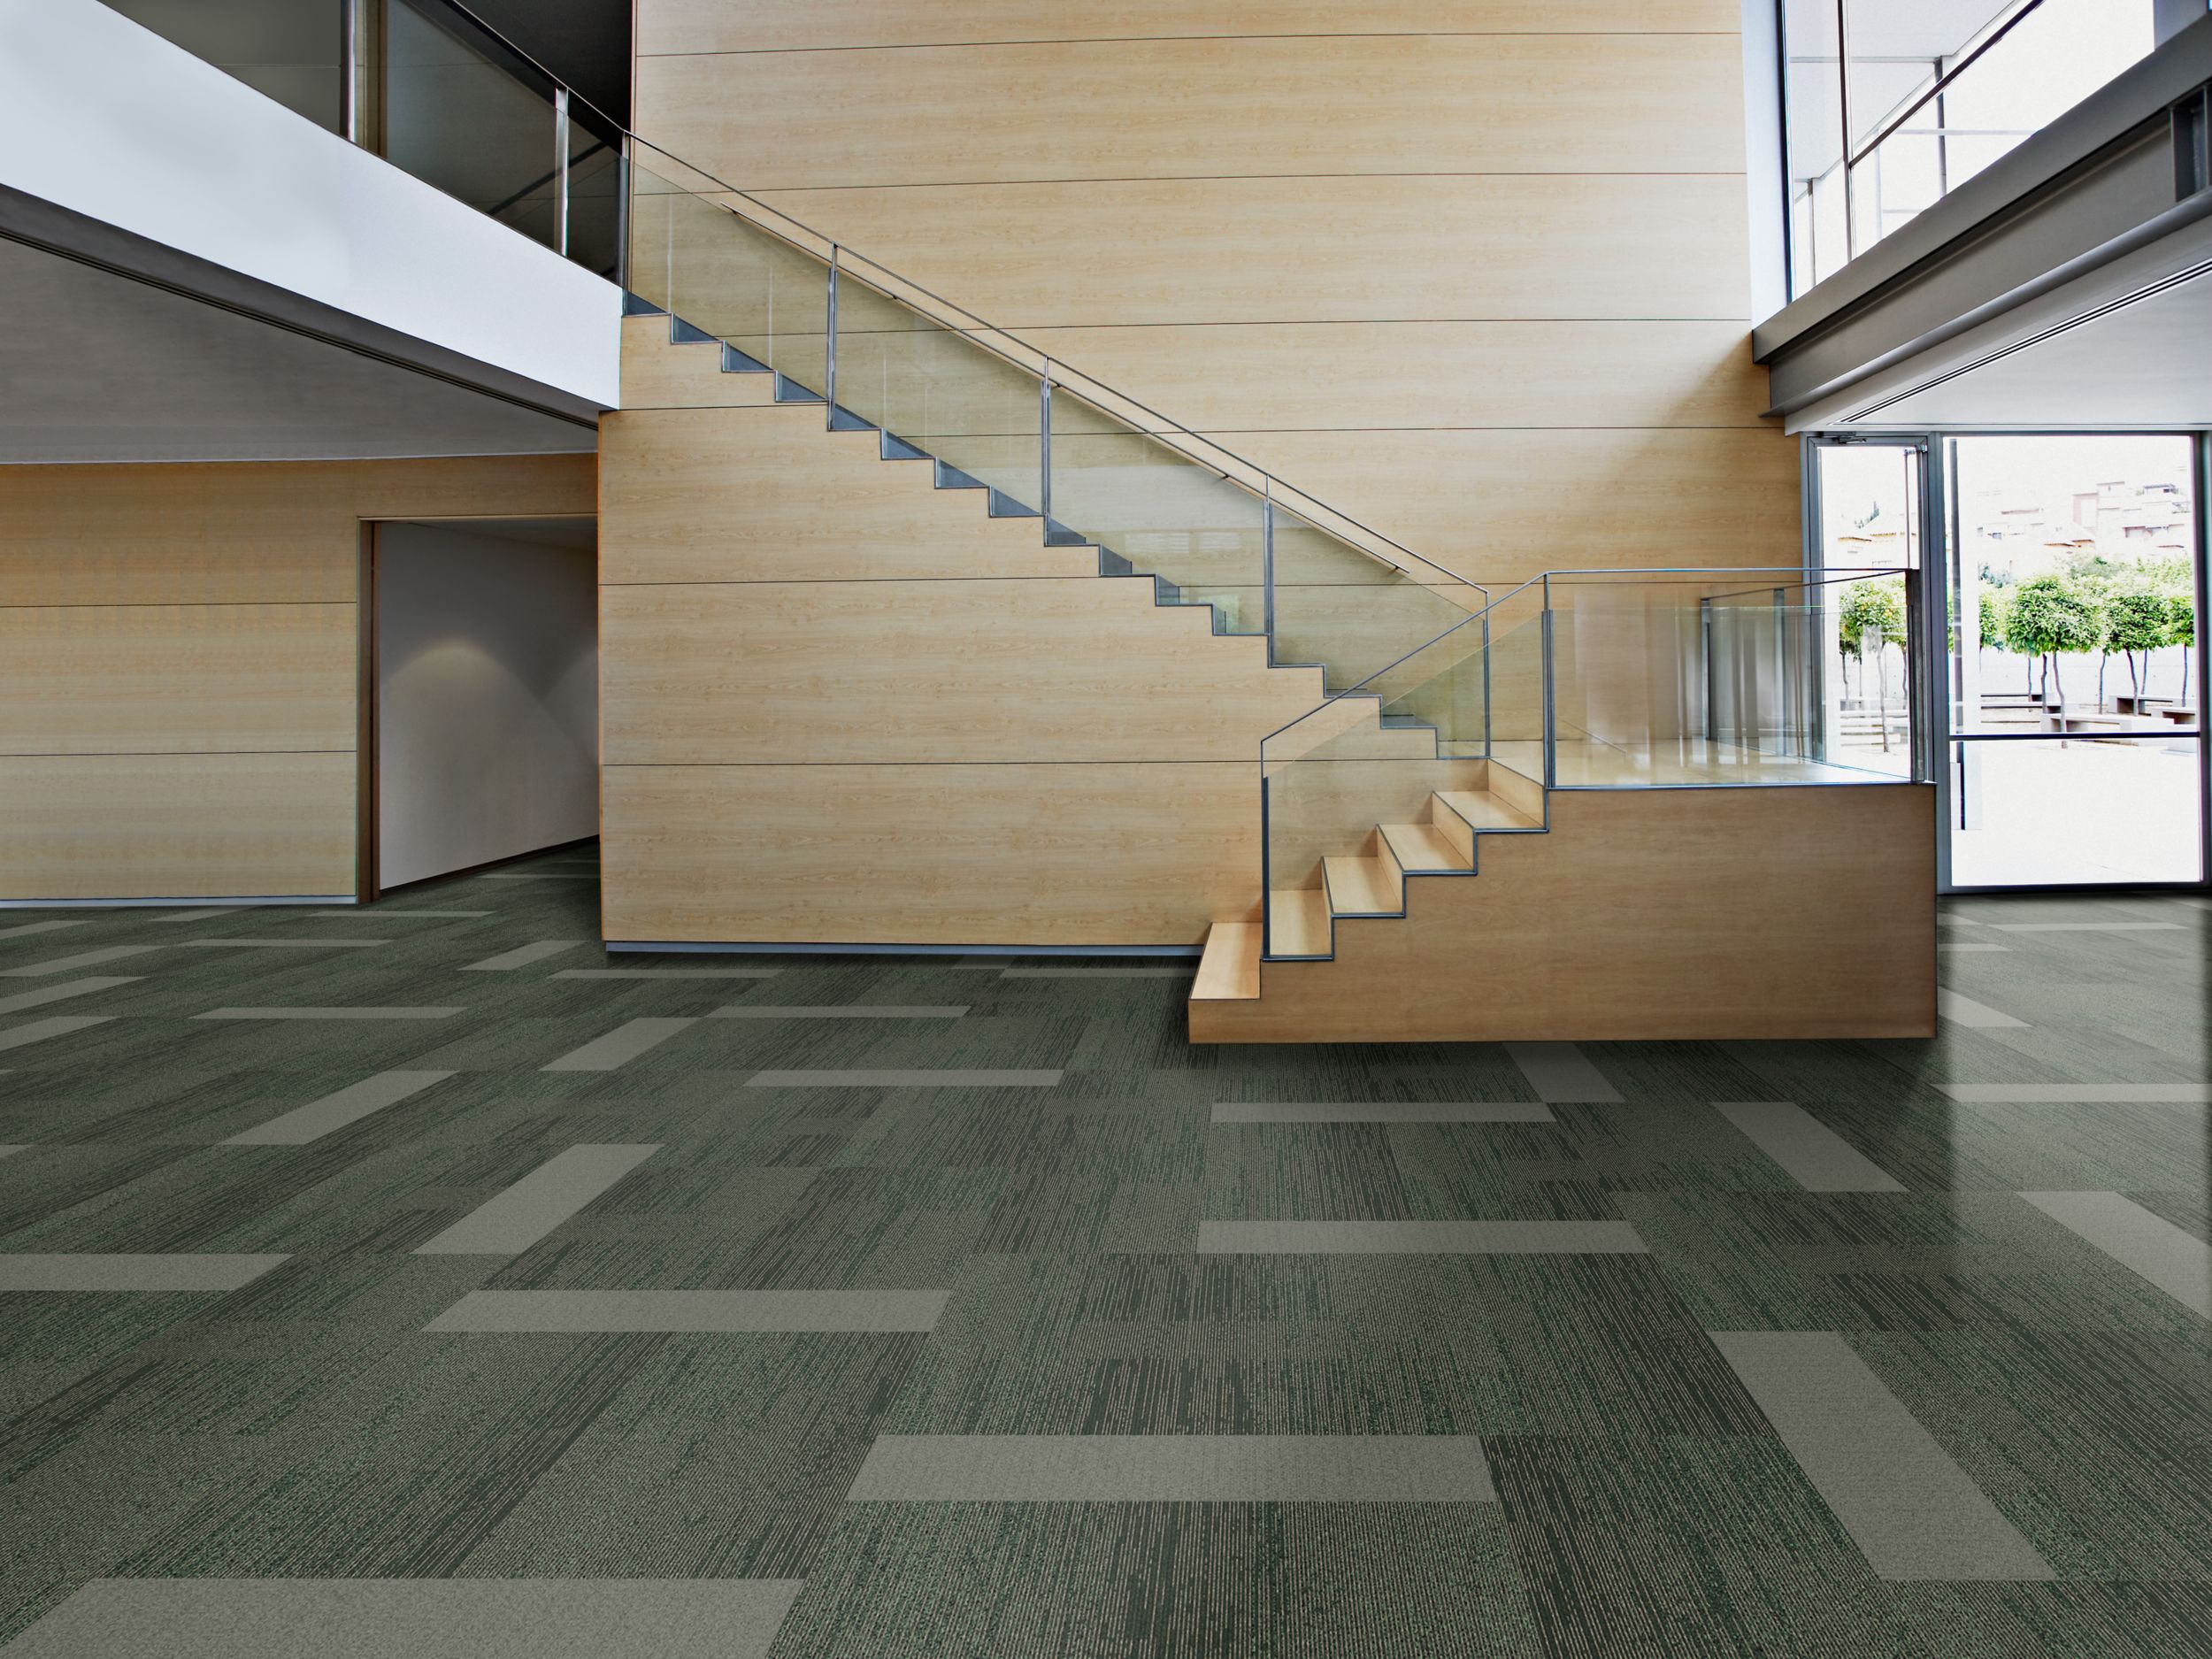 Interface San Roco and Monochrome carpet tile in open area with stairwell and wood accents imagen número 3